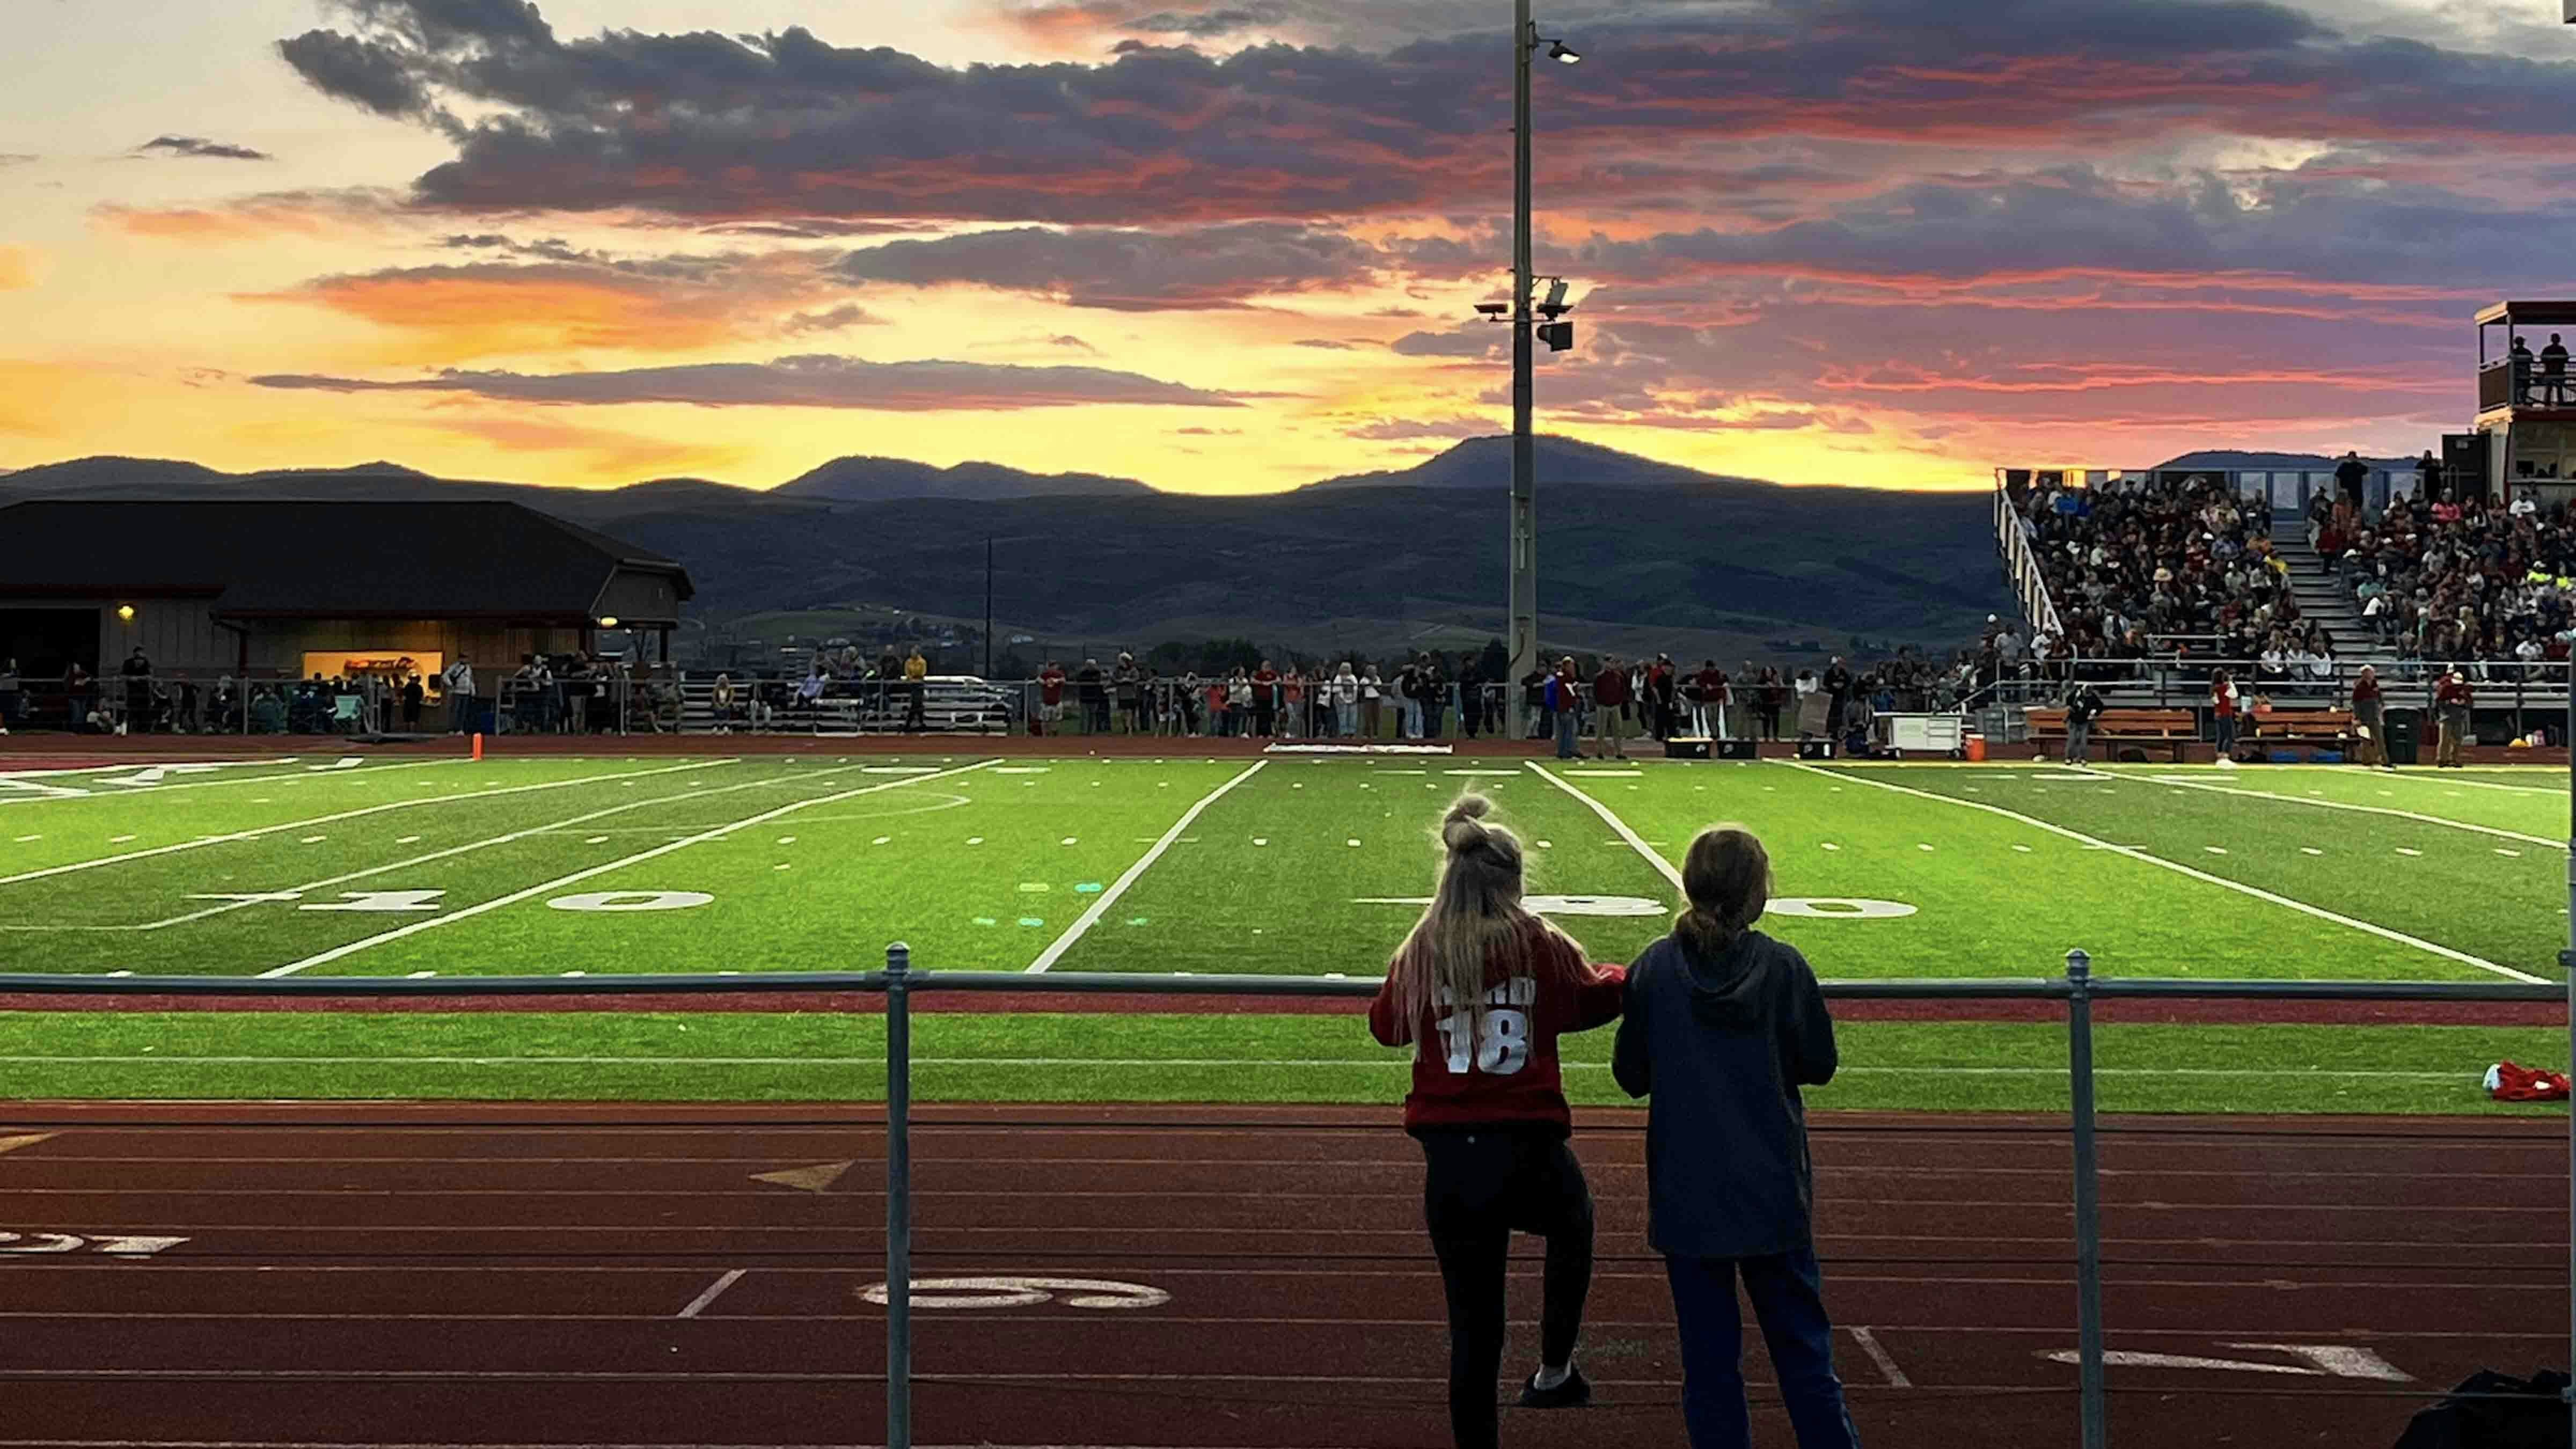 Sunset over Braves' Field in Afton, Wyoming, on Sept. 8, 2023